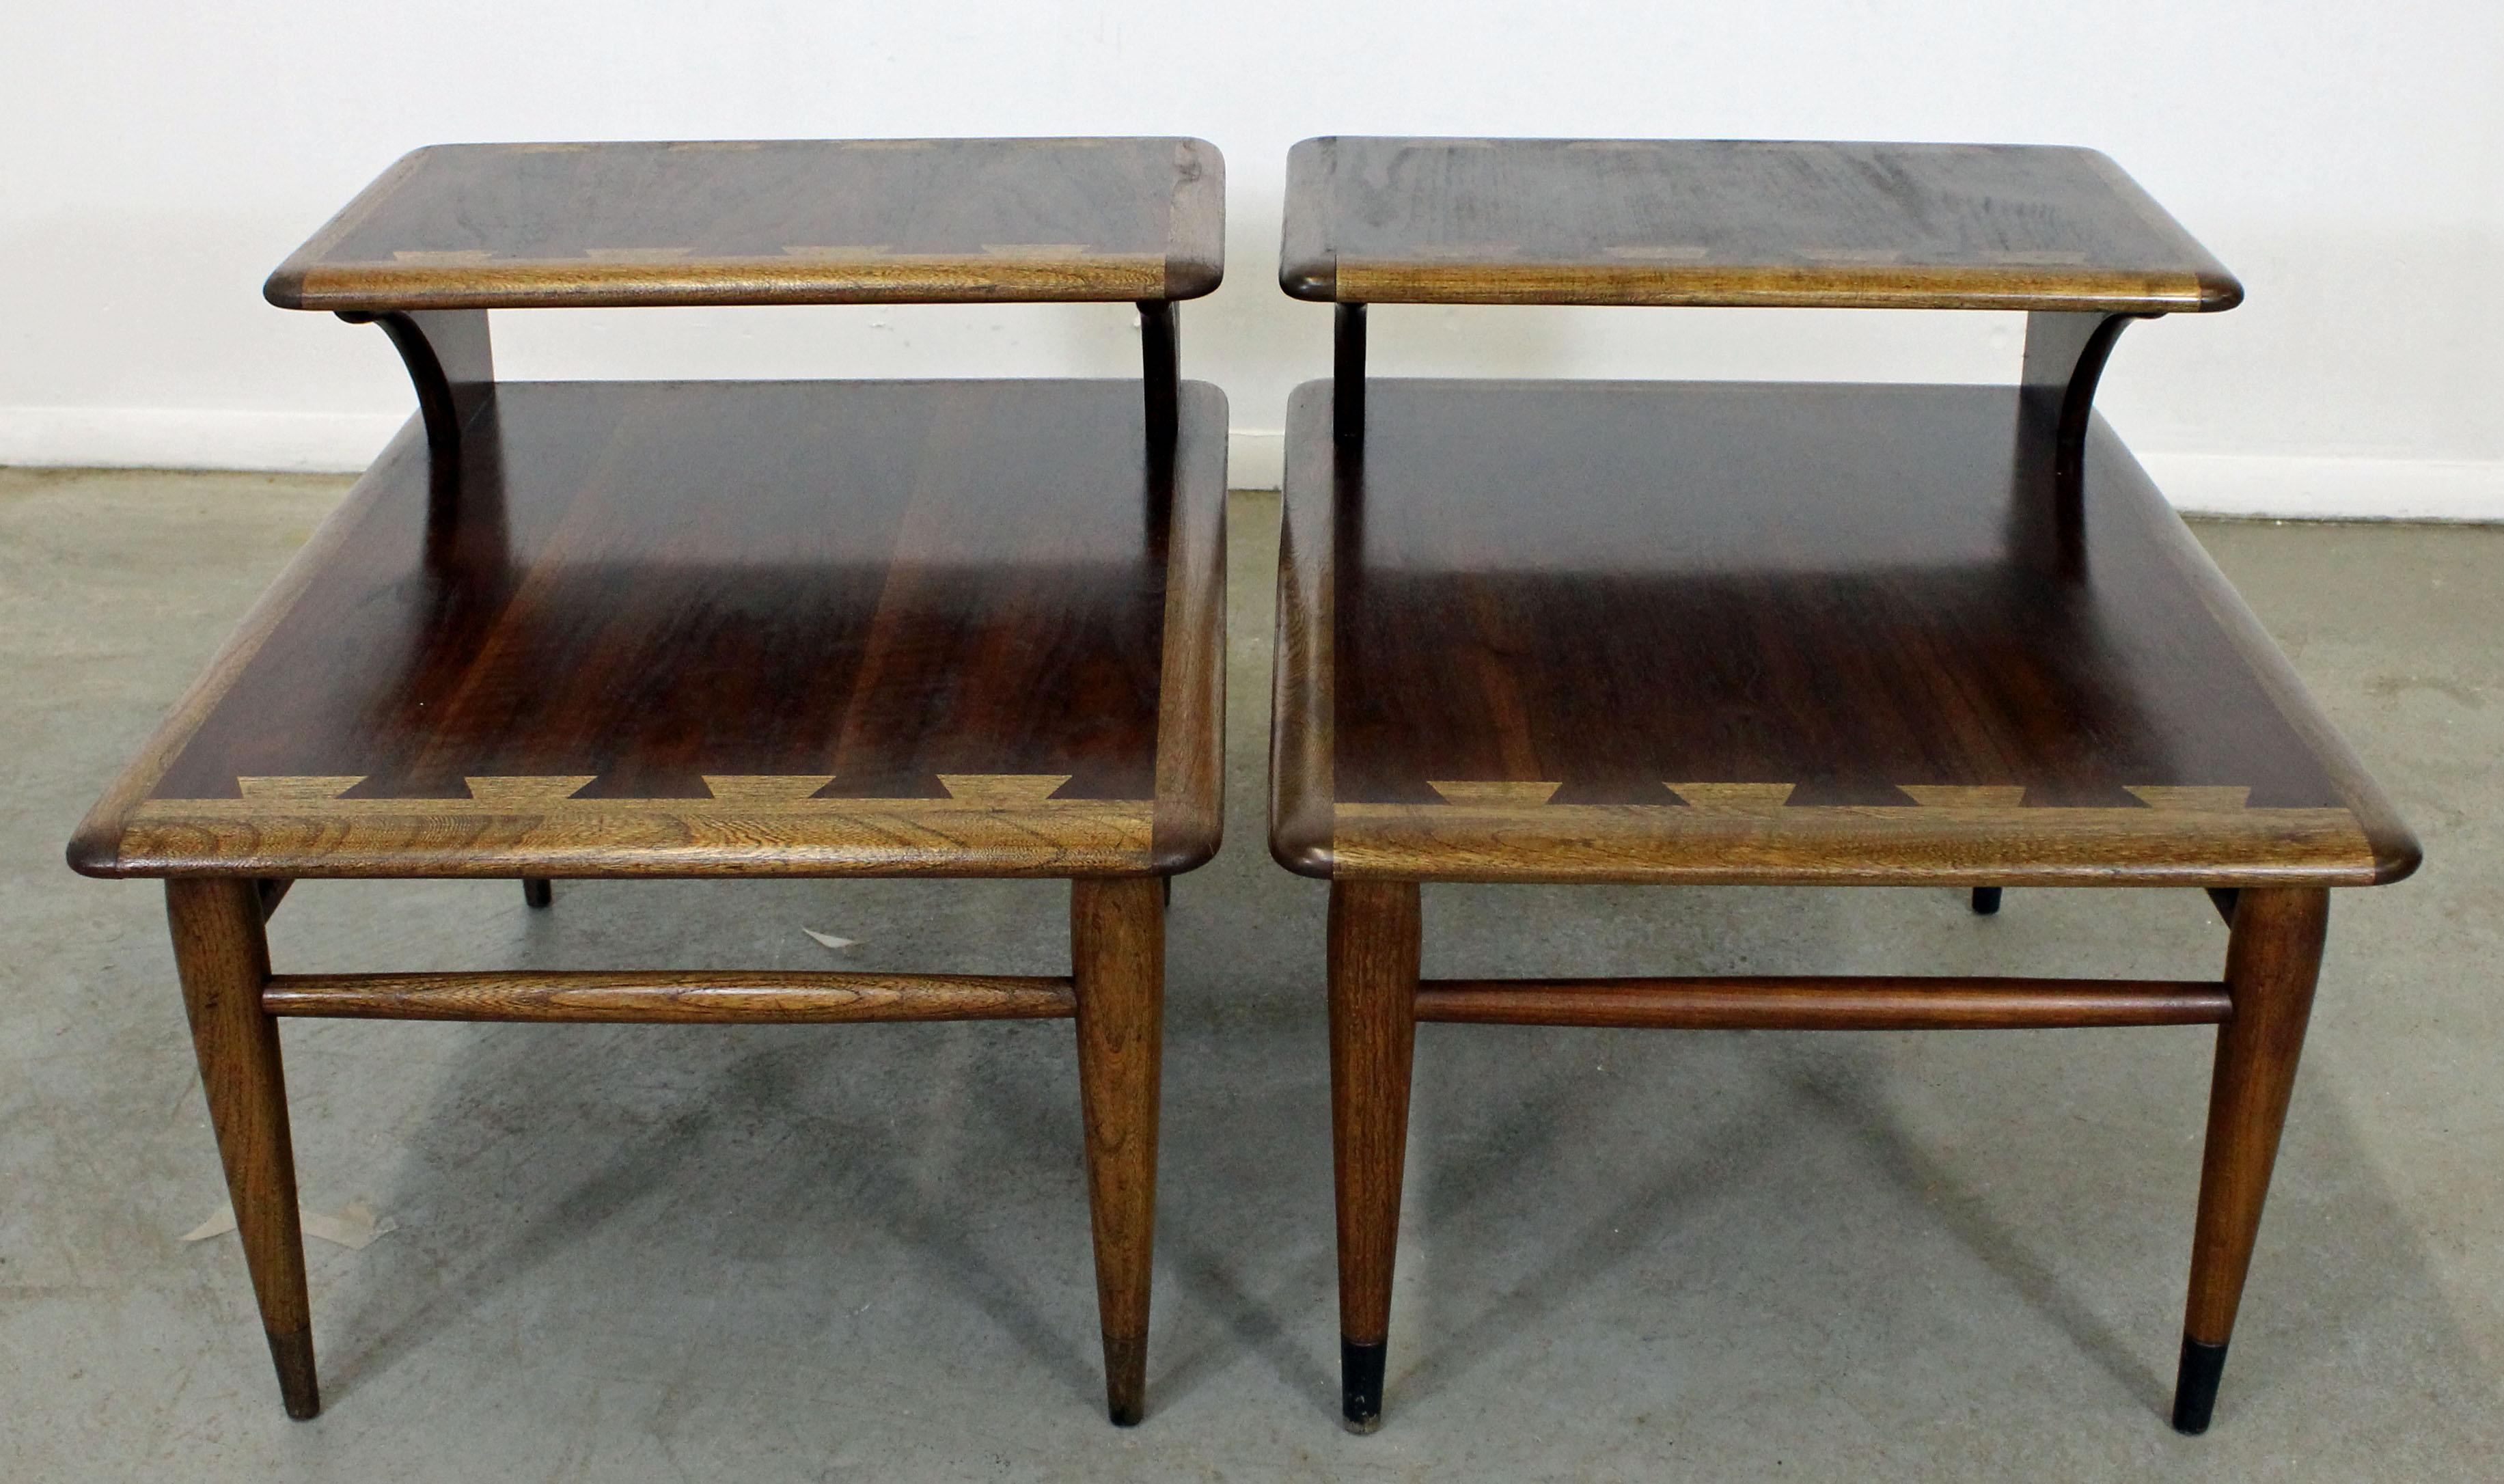 Offered is a pair of mid century modern end tables from the Lane 'Acclaim' collection, designed by Andre Bus. They have the signature dovetailed design, two tiers, and tapered legs with an oak edge with a walnut top and walnut legs. They are in